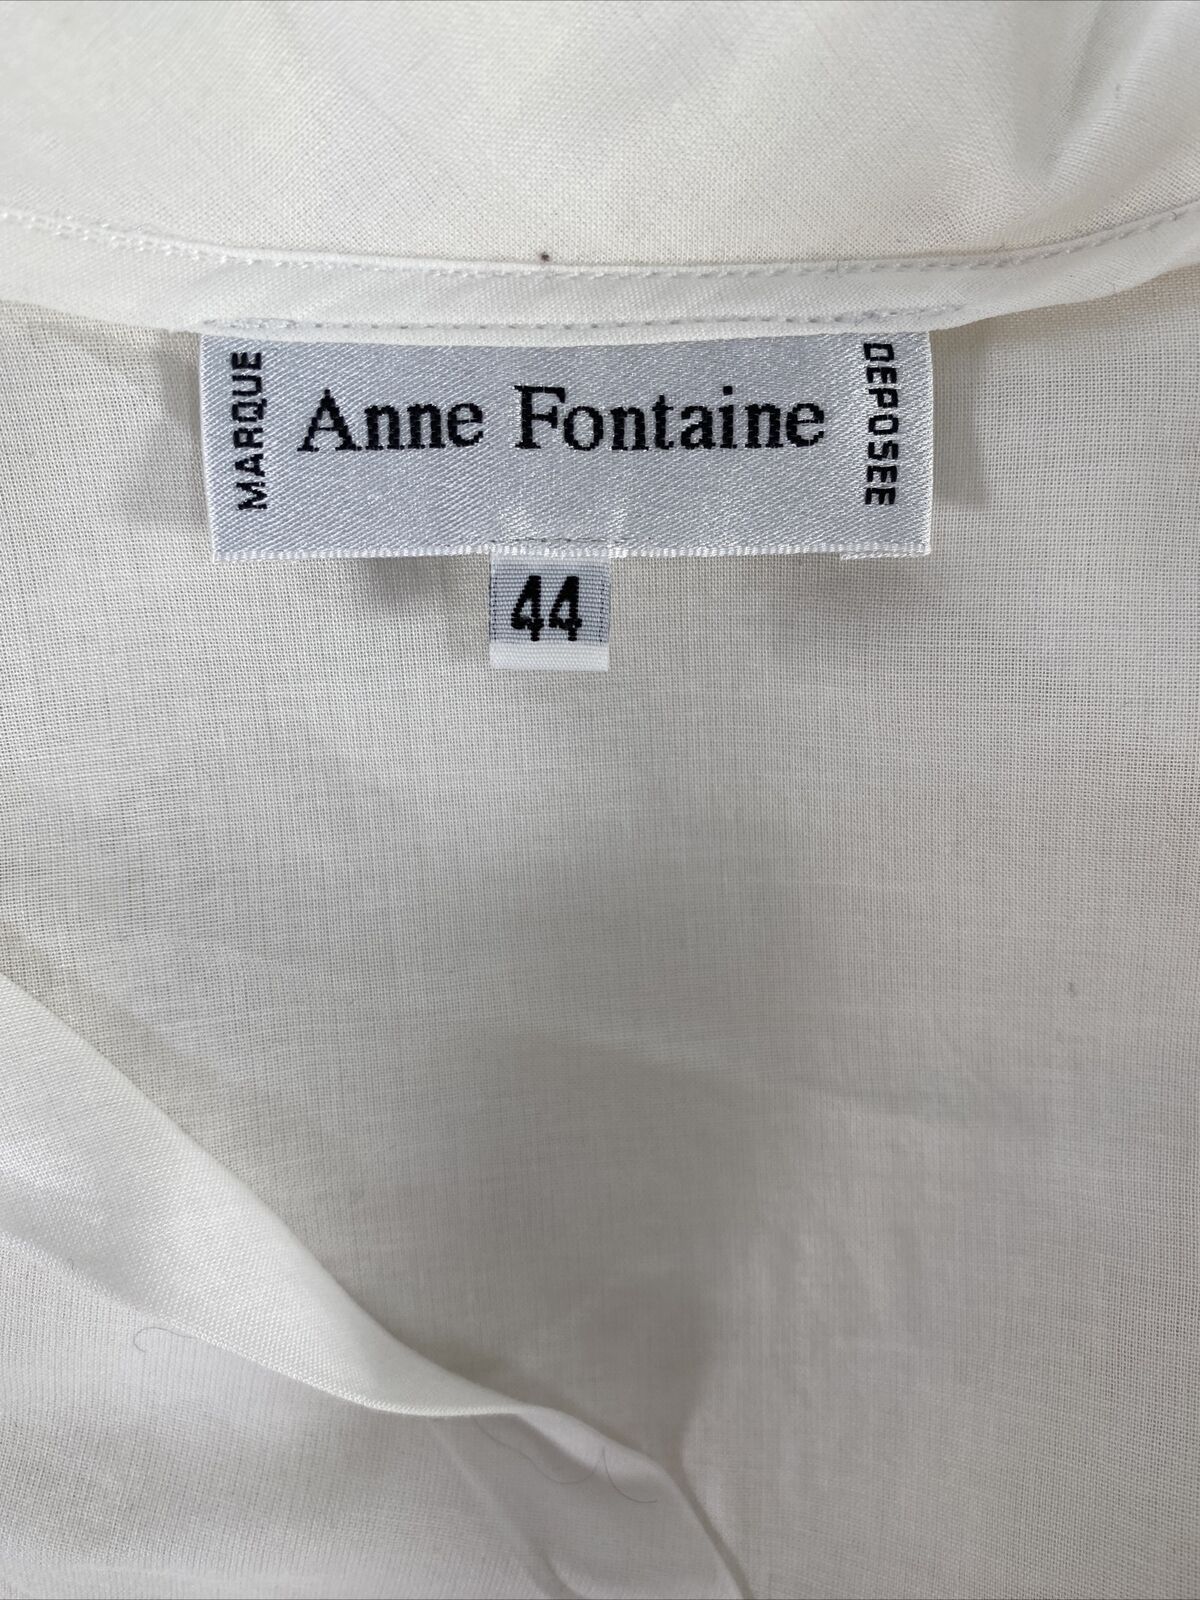 Anne Fontaine Women's White Ruffle Long Button Up Blouse - 44